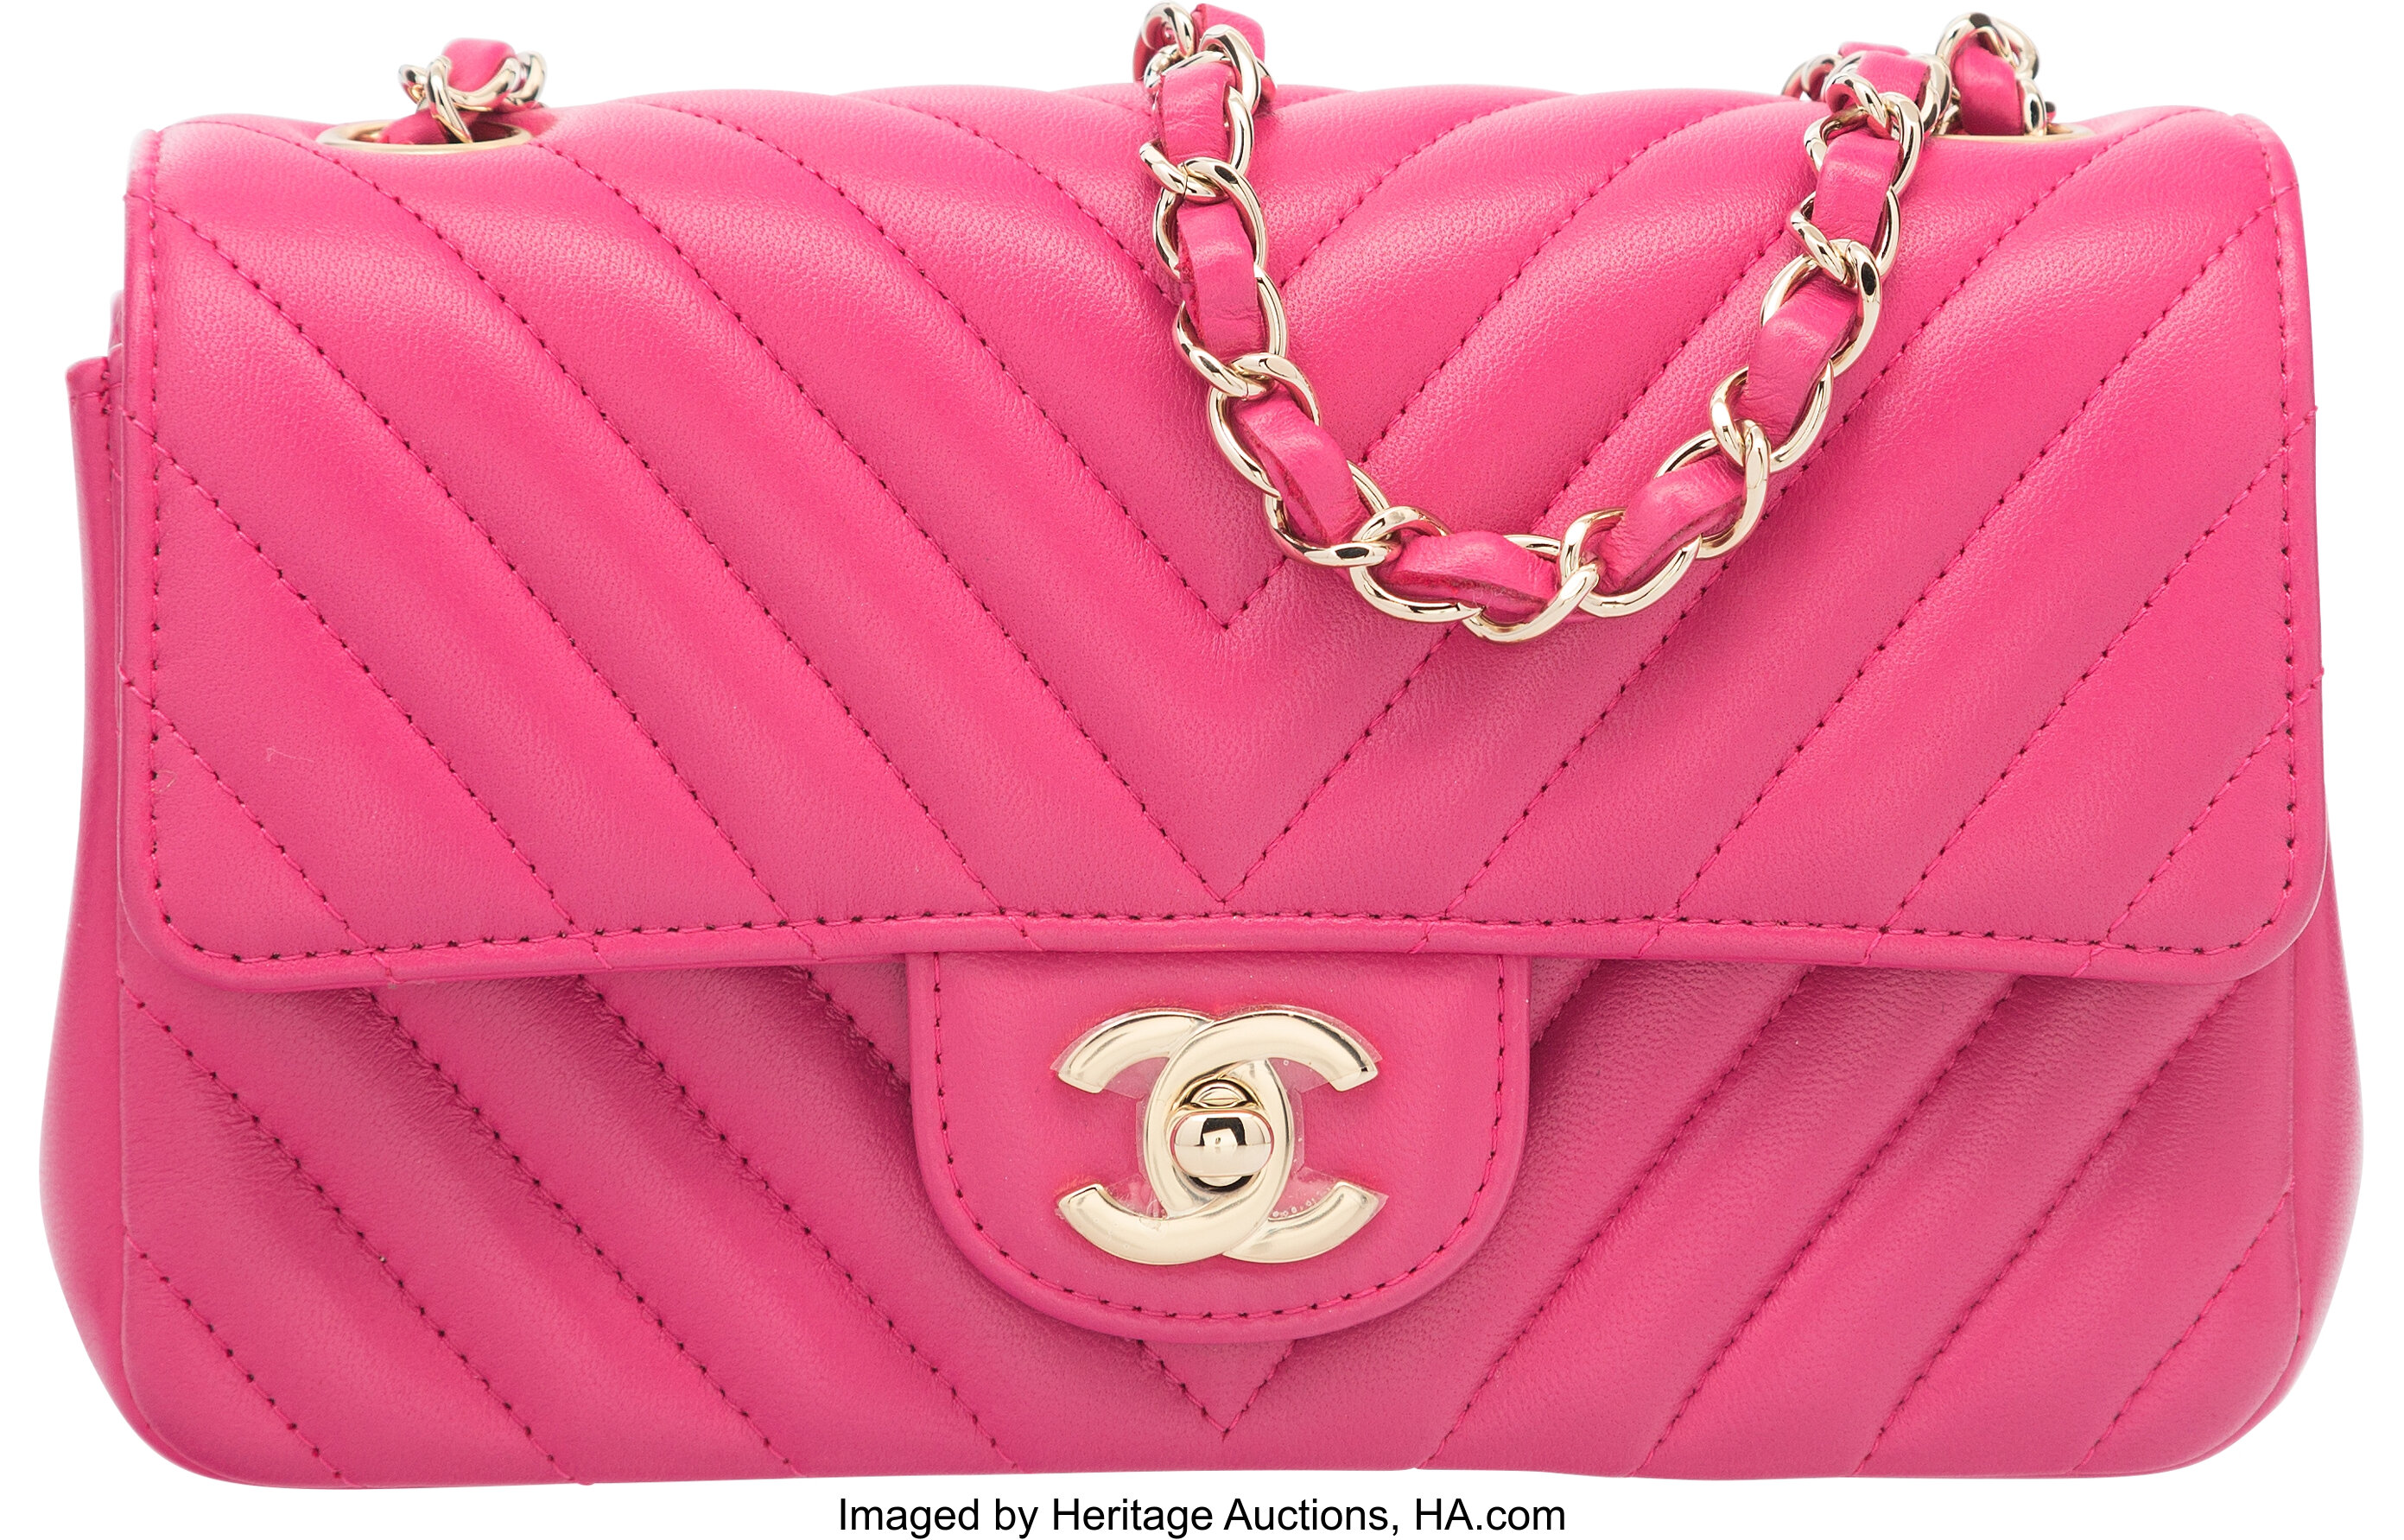 BagButler - The Chanel Pink Chevron Mini Flap bag is undeniably